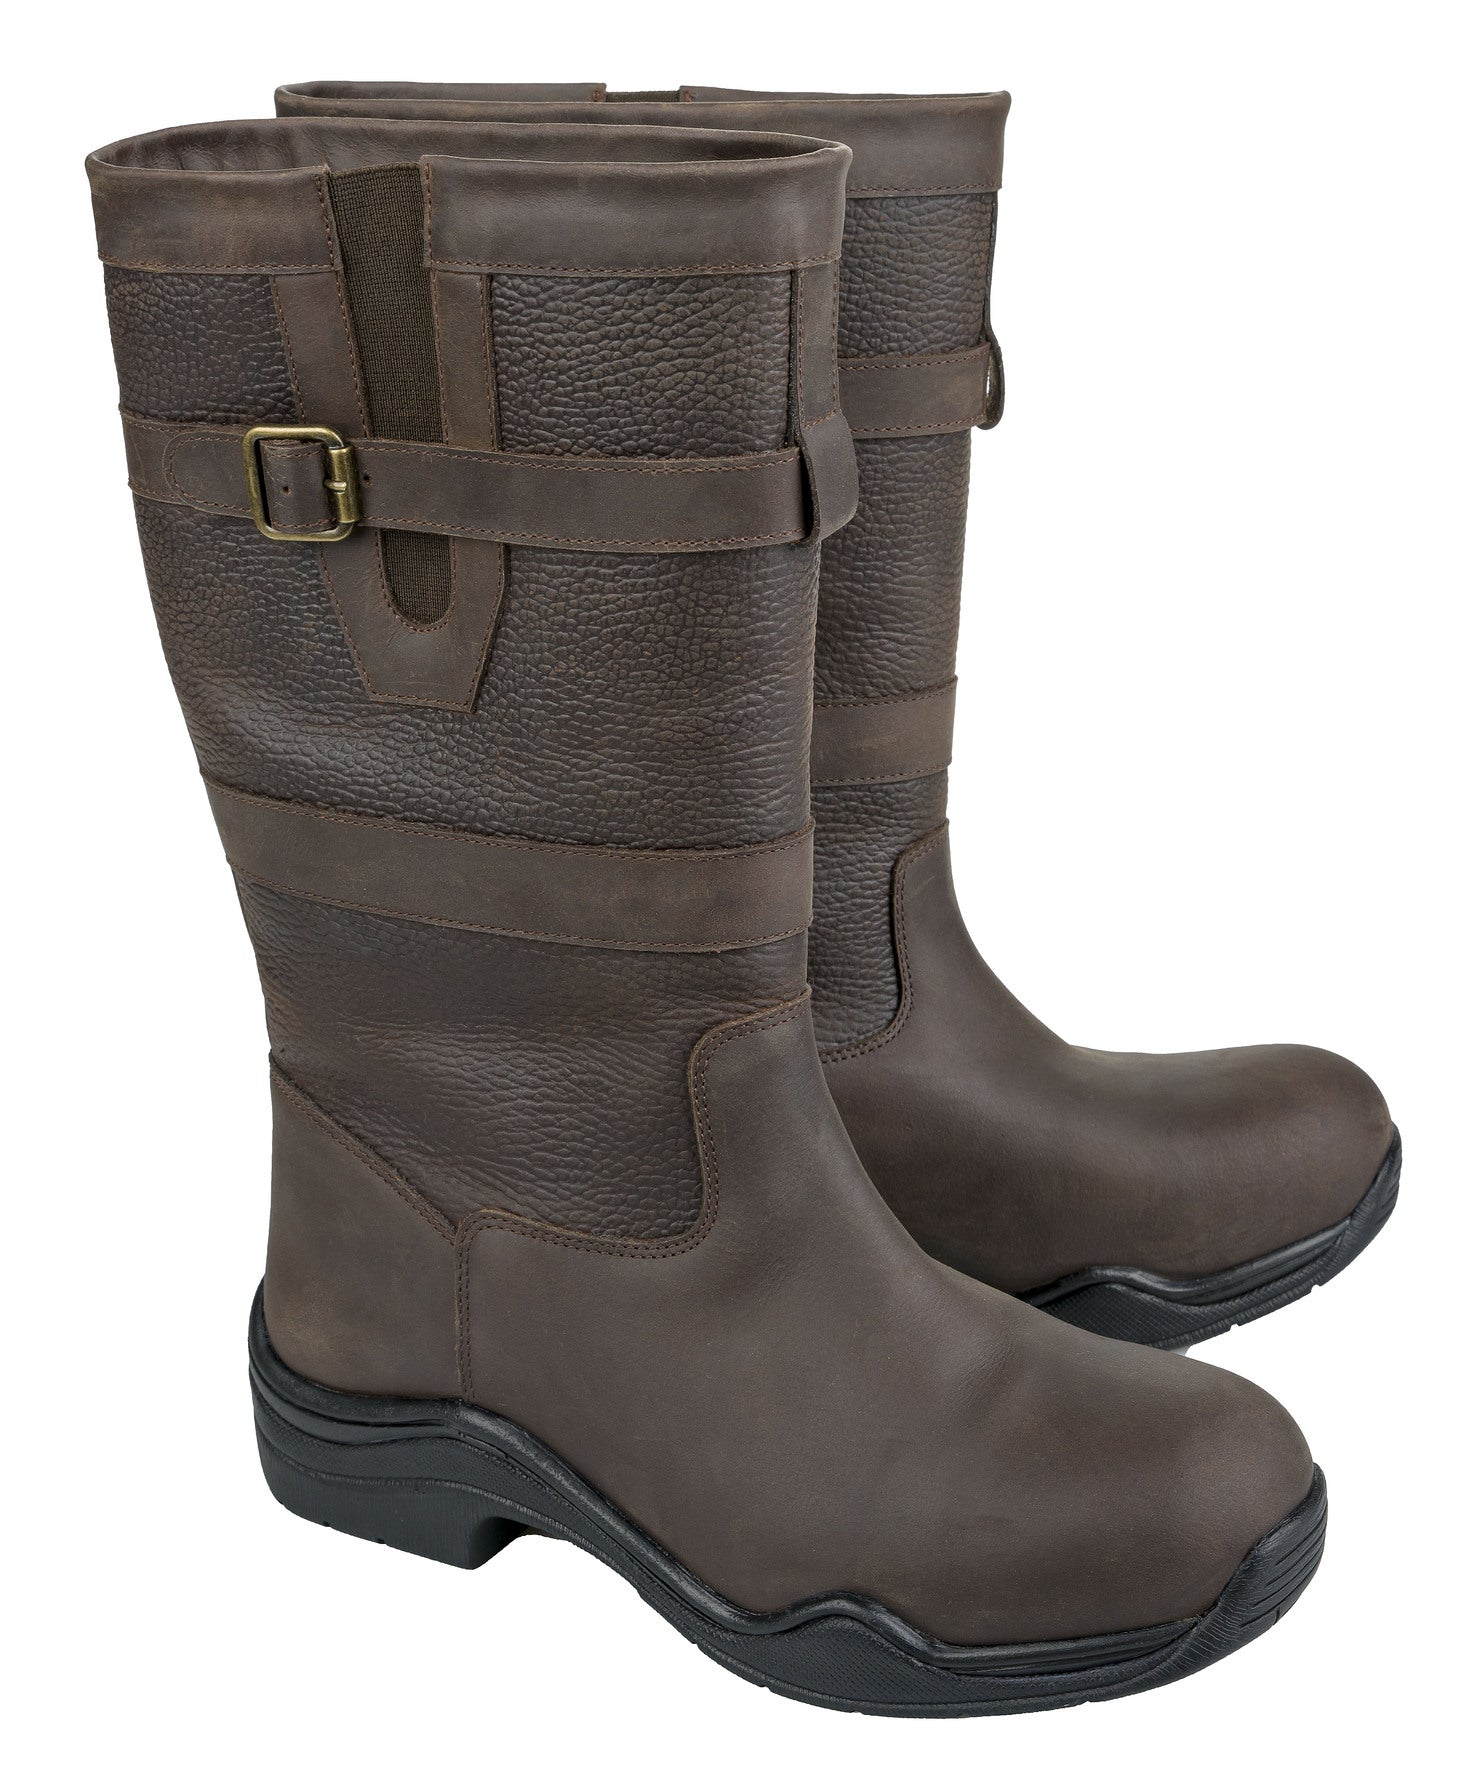 Tuffrider Galloway Country Boot- Brown - Breeches.com